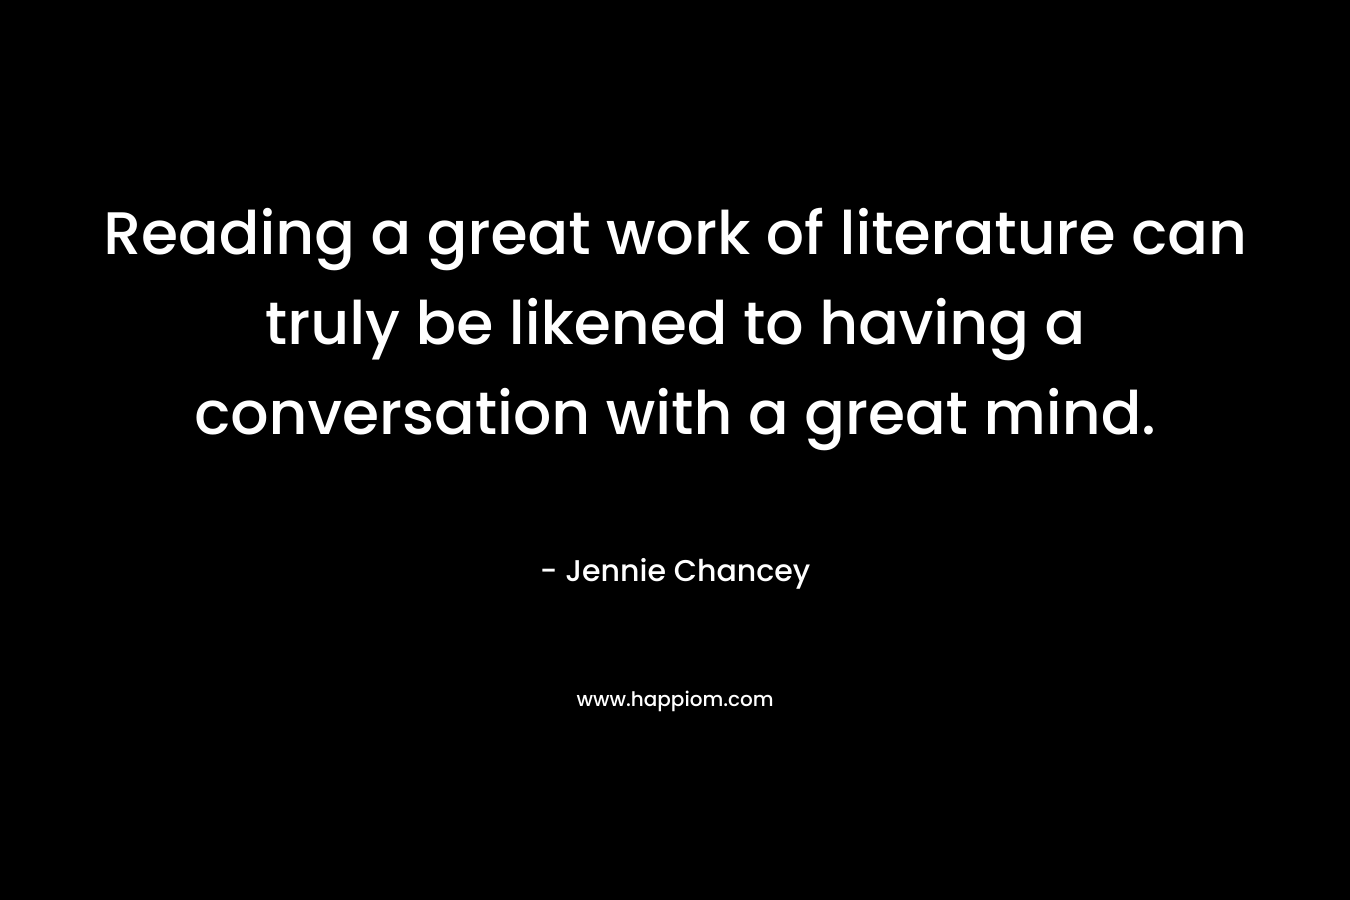 Reading a great work of literature can truly be likened to having a conversation with a great mind.